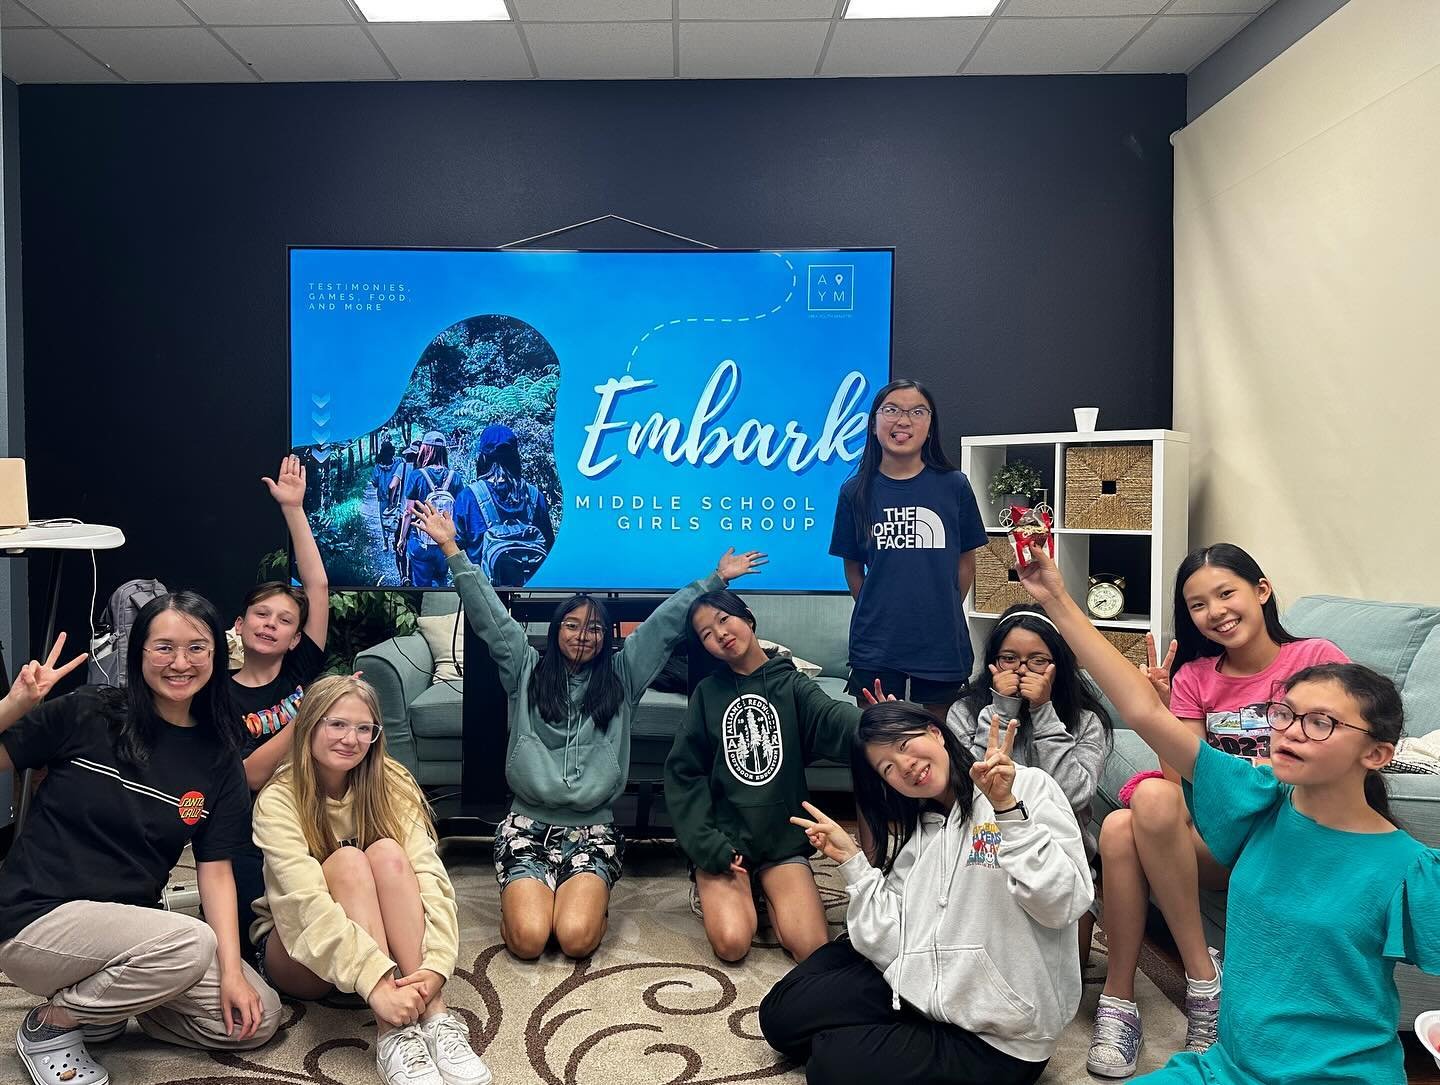 ✨Seeker Small Group 

Last friday we had several of our students put together a seeker small group event for their friends! It was a student led event and they took charge of dinner, games, testimonies, apologetics and games 👏  Good job guys 🥳🥳

#